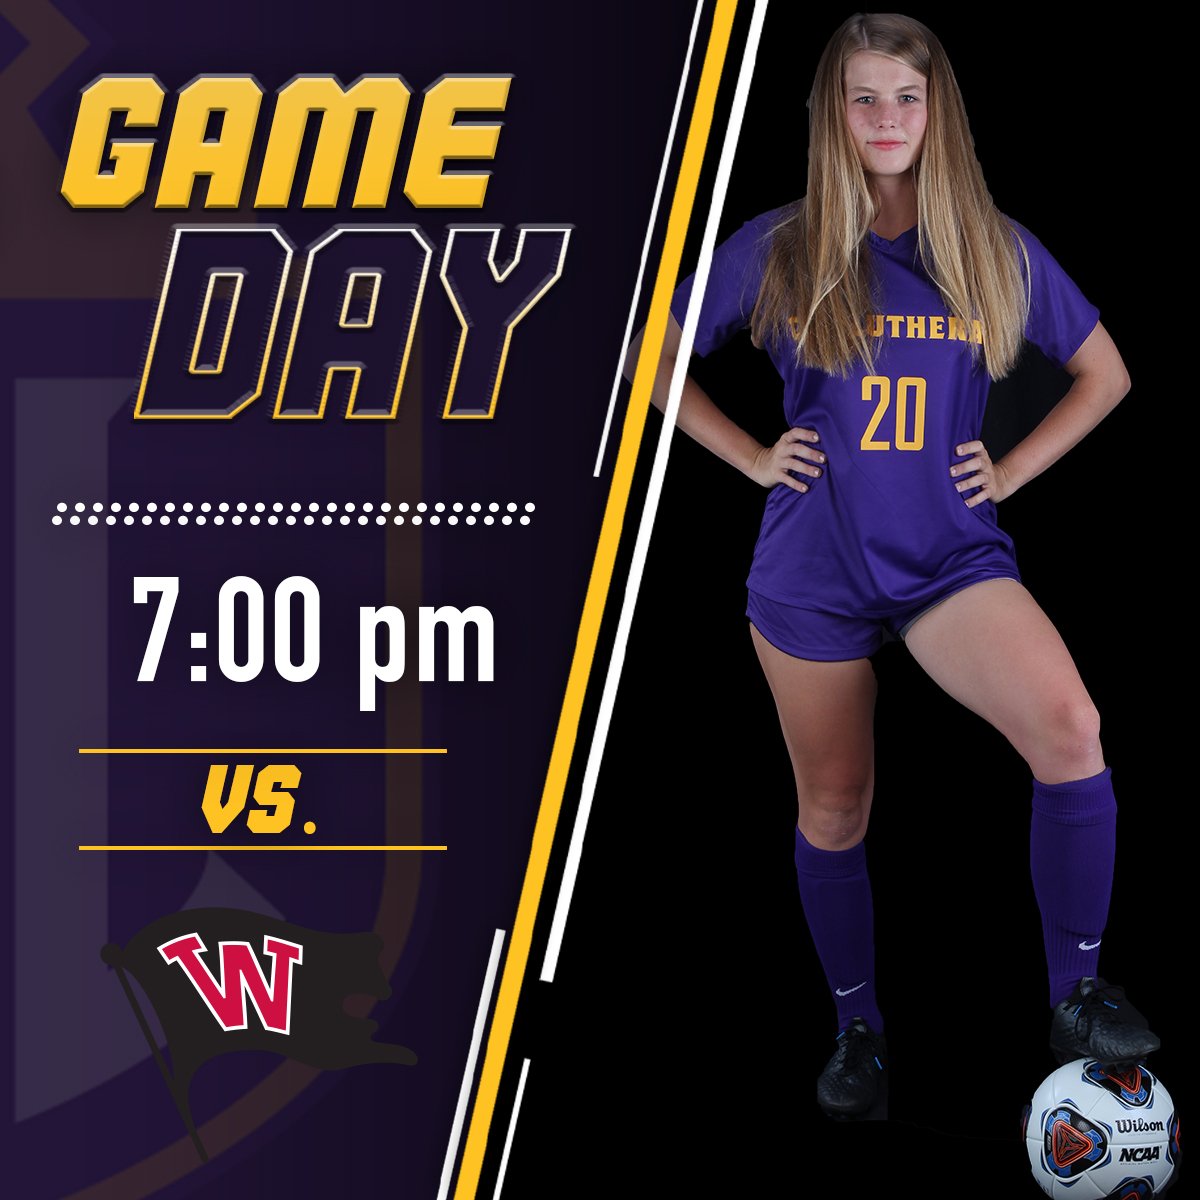 IT'S GAME DAY! For the first time in 2019, #CLUsports competes on their home ground as @CLUwVolleyball starts off in the Cal Lu Fornia Invitational and @CLUwSoccer hosts Whitworth at 7 p.m. for their home opener at William Rolland Stadium! #OwnTheThrone